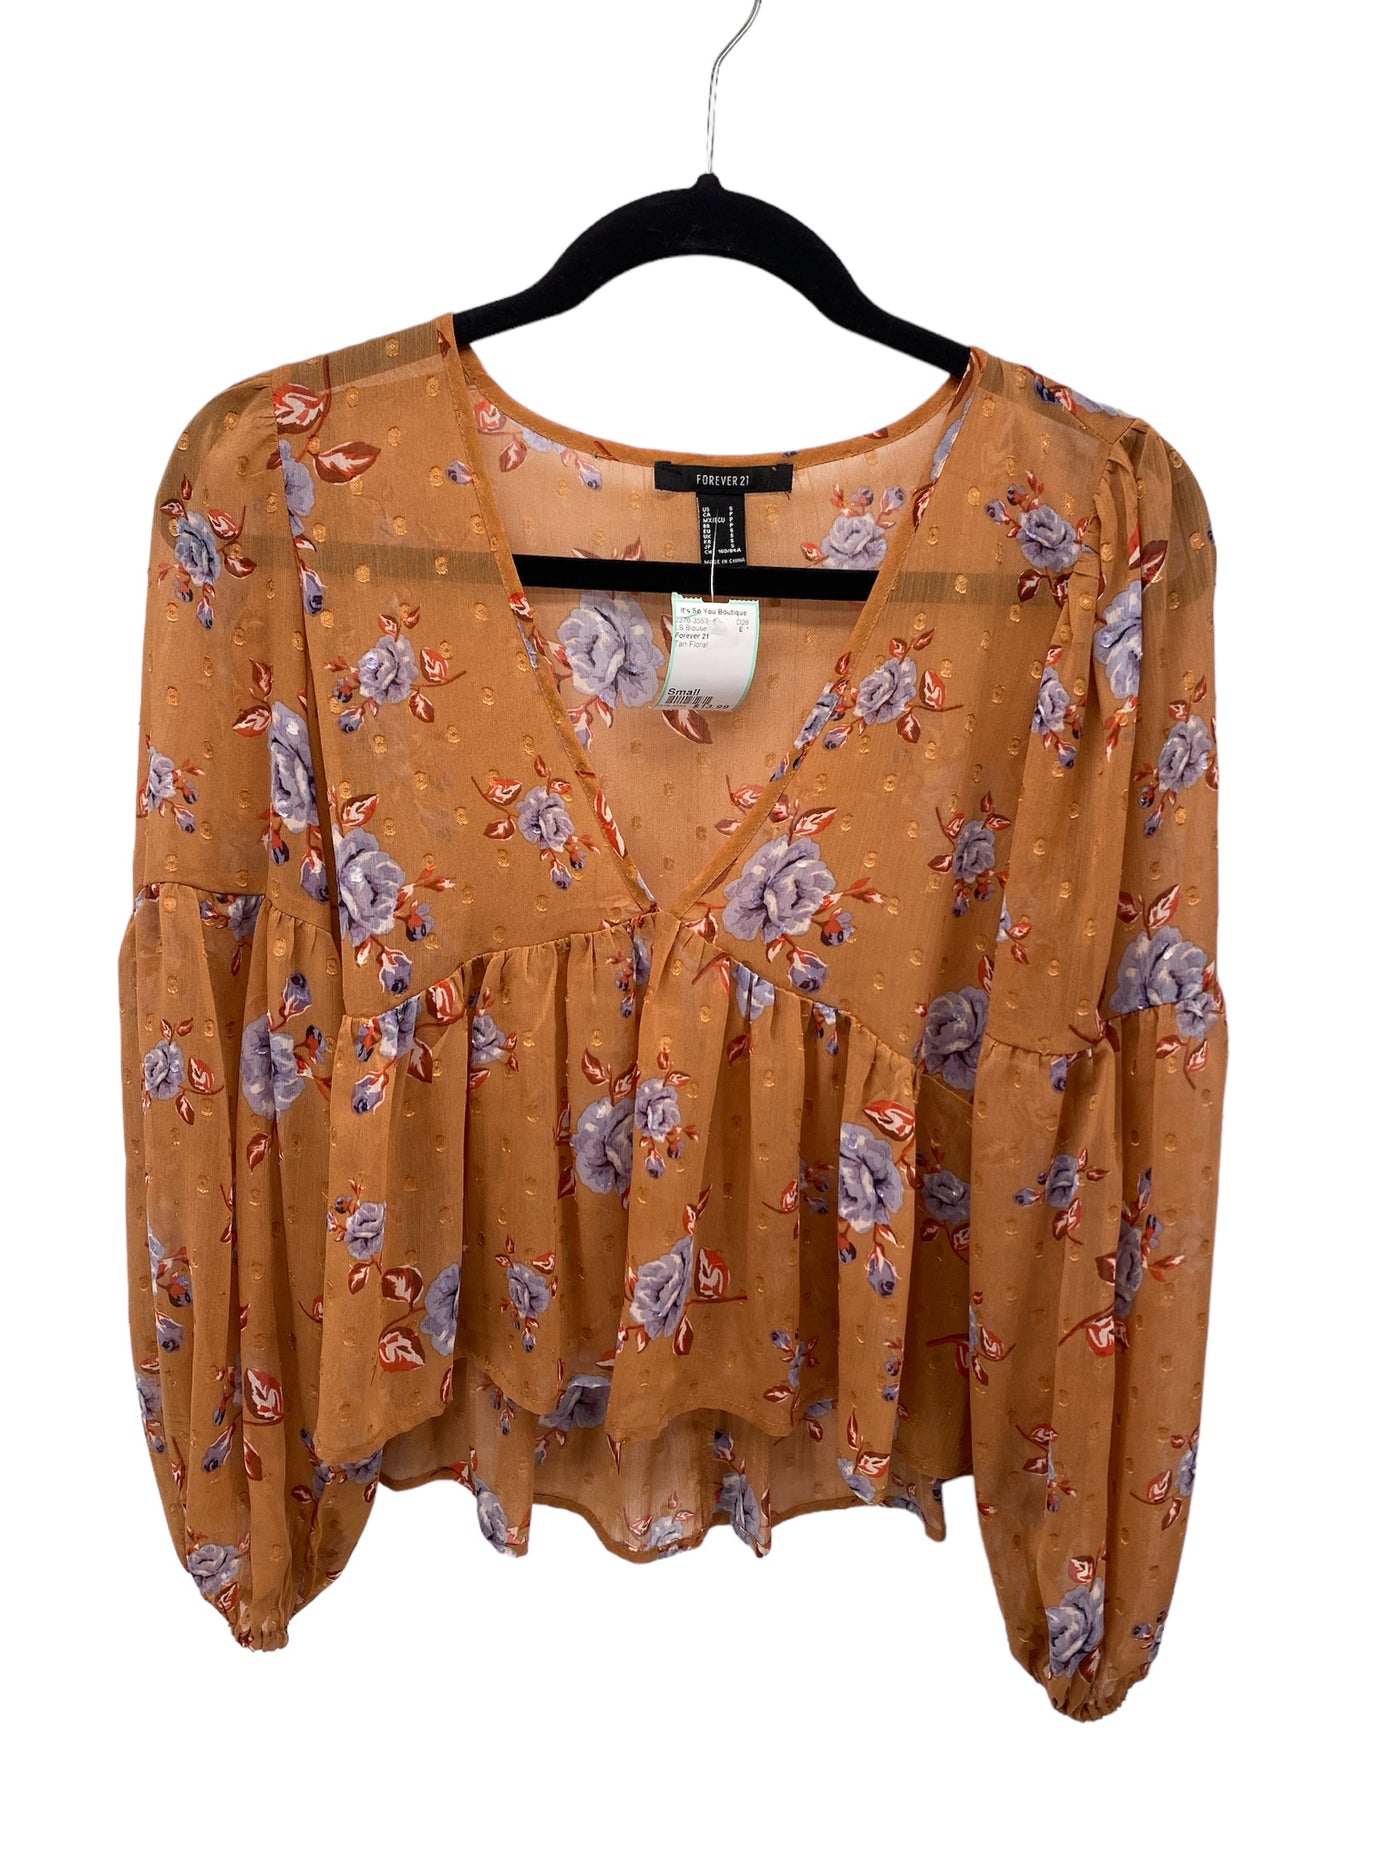 Forever 21 Misses Size Small Tan Floral LS Blouse